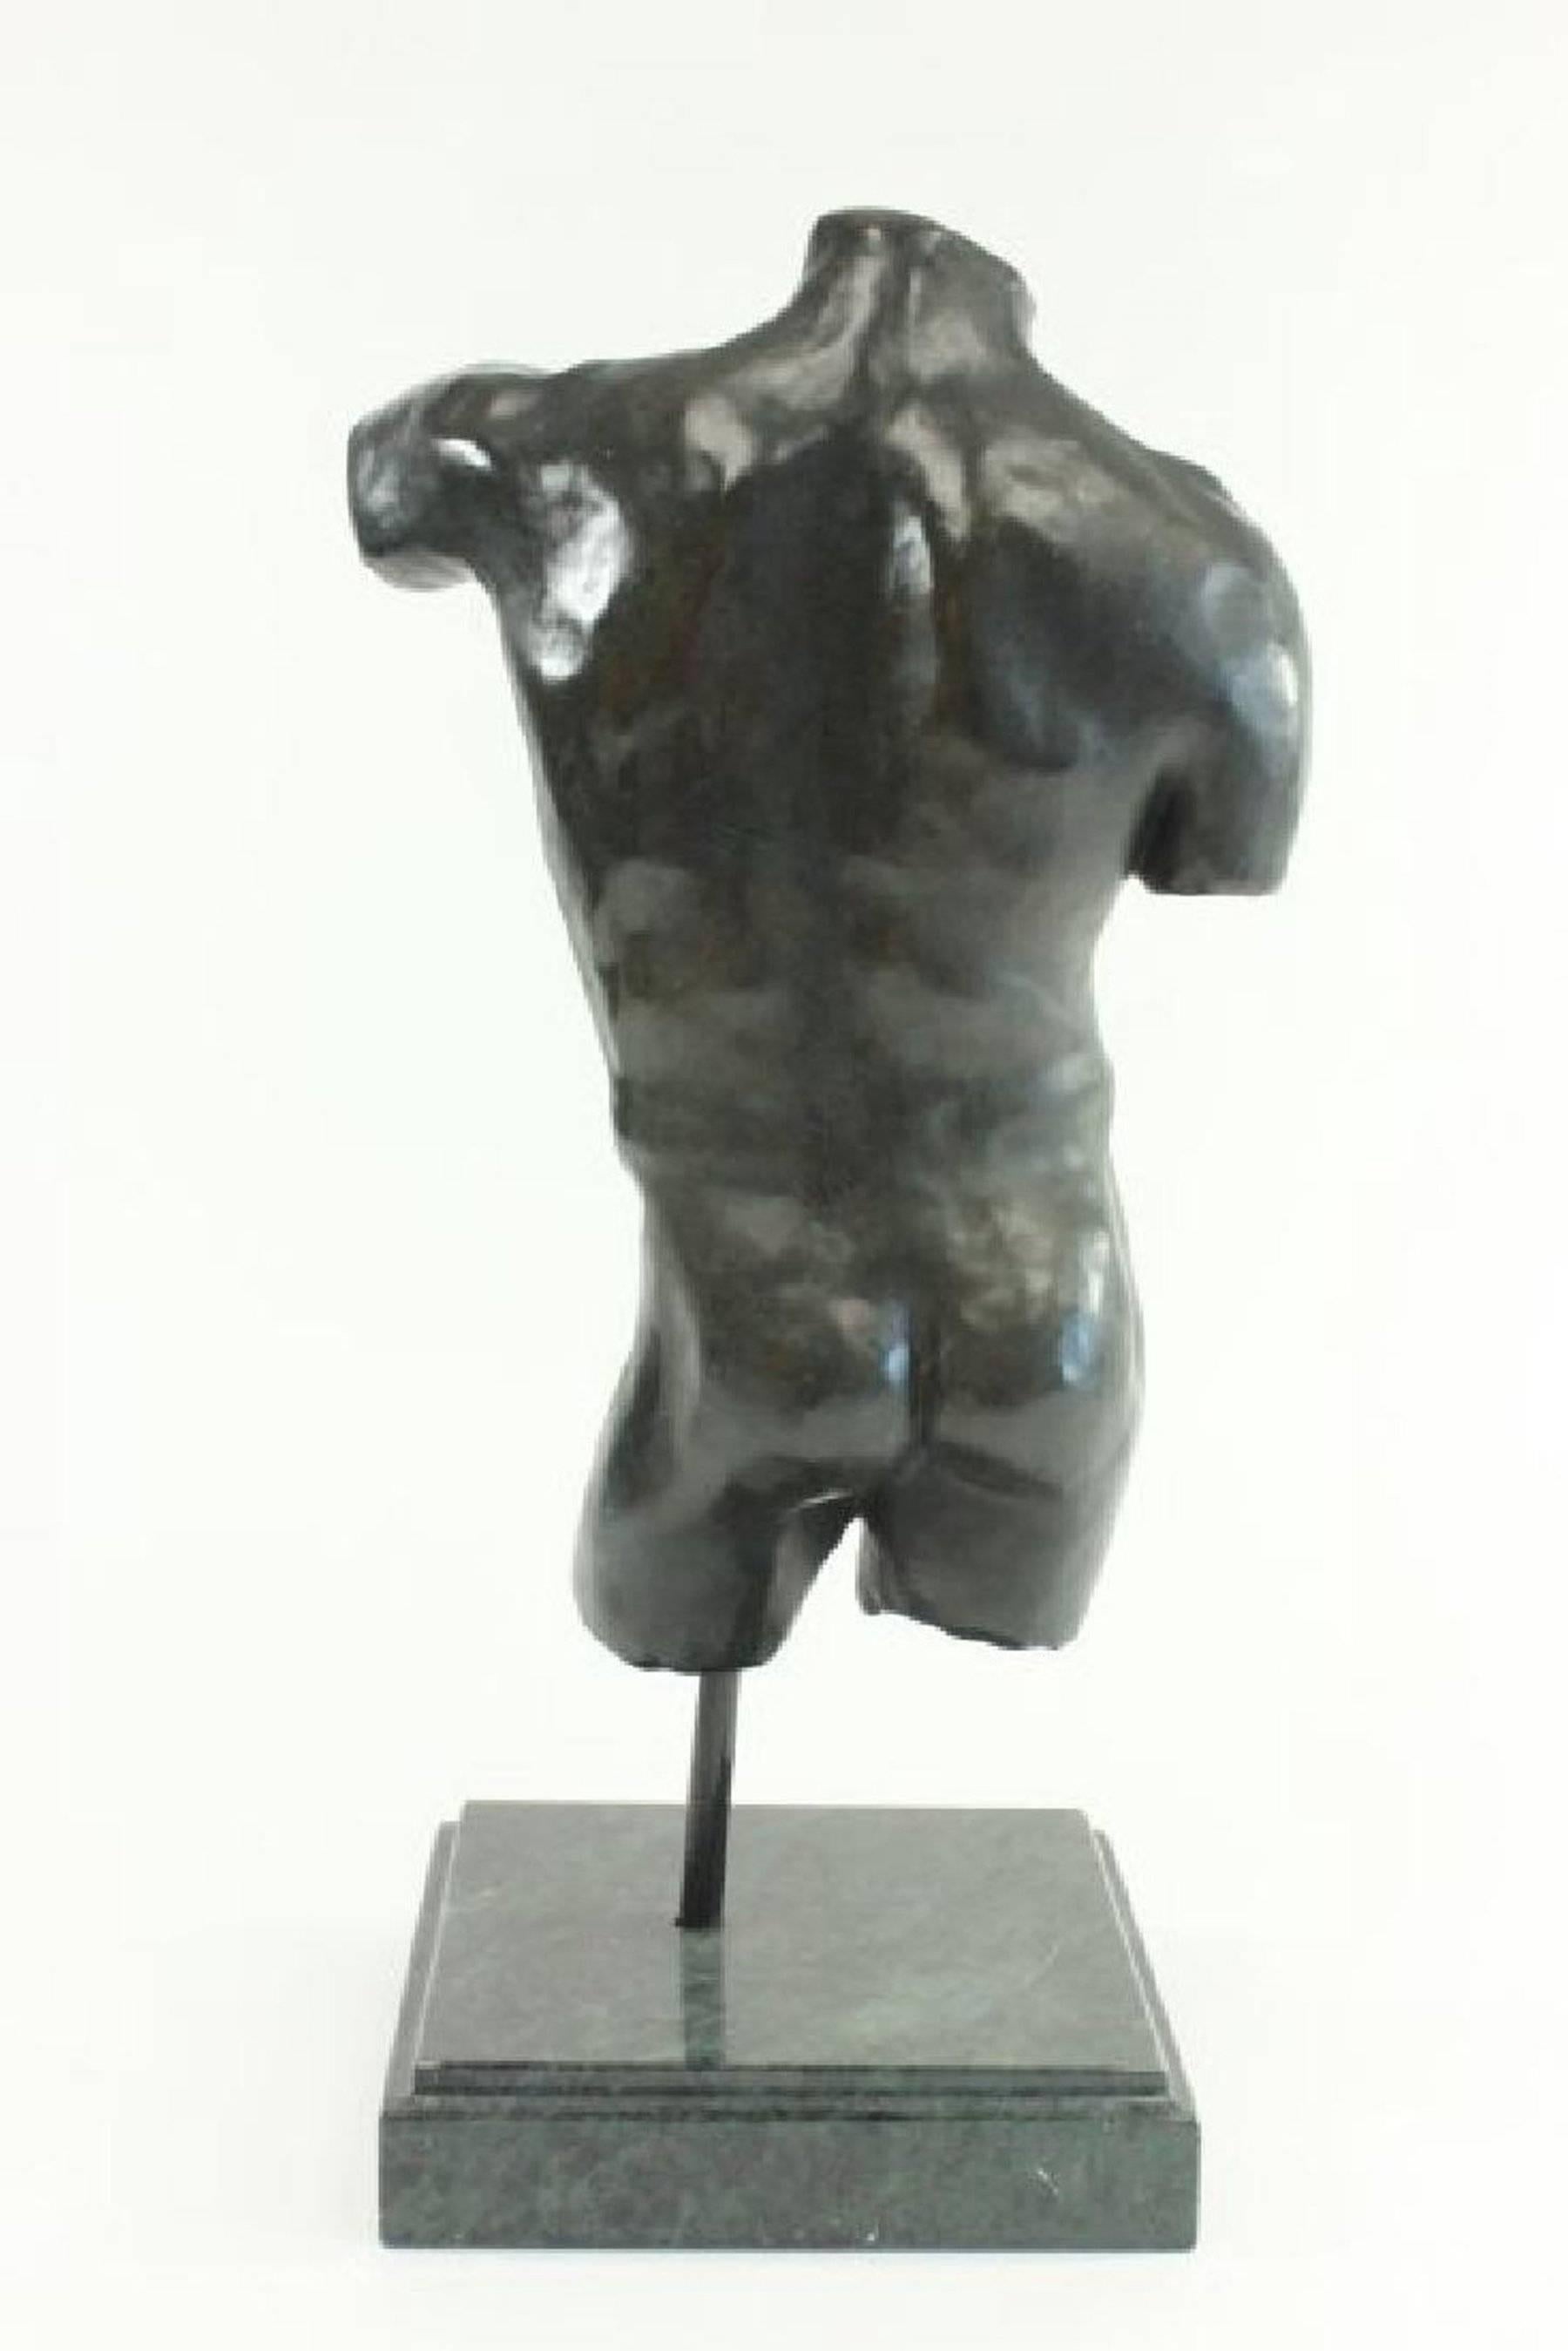 North American Bronze Torso Museum Mounted, After the Antique